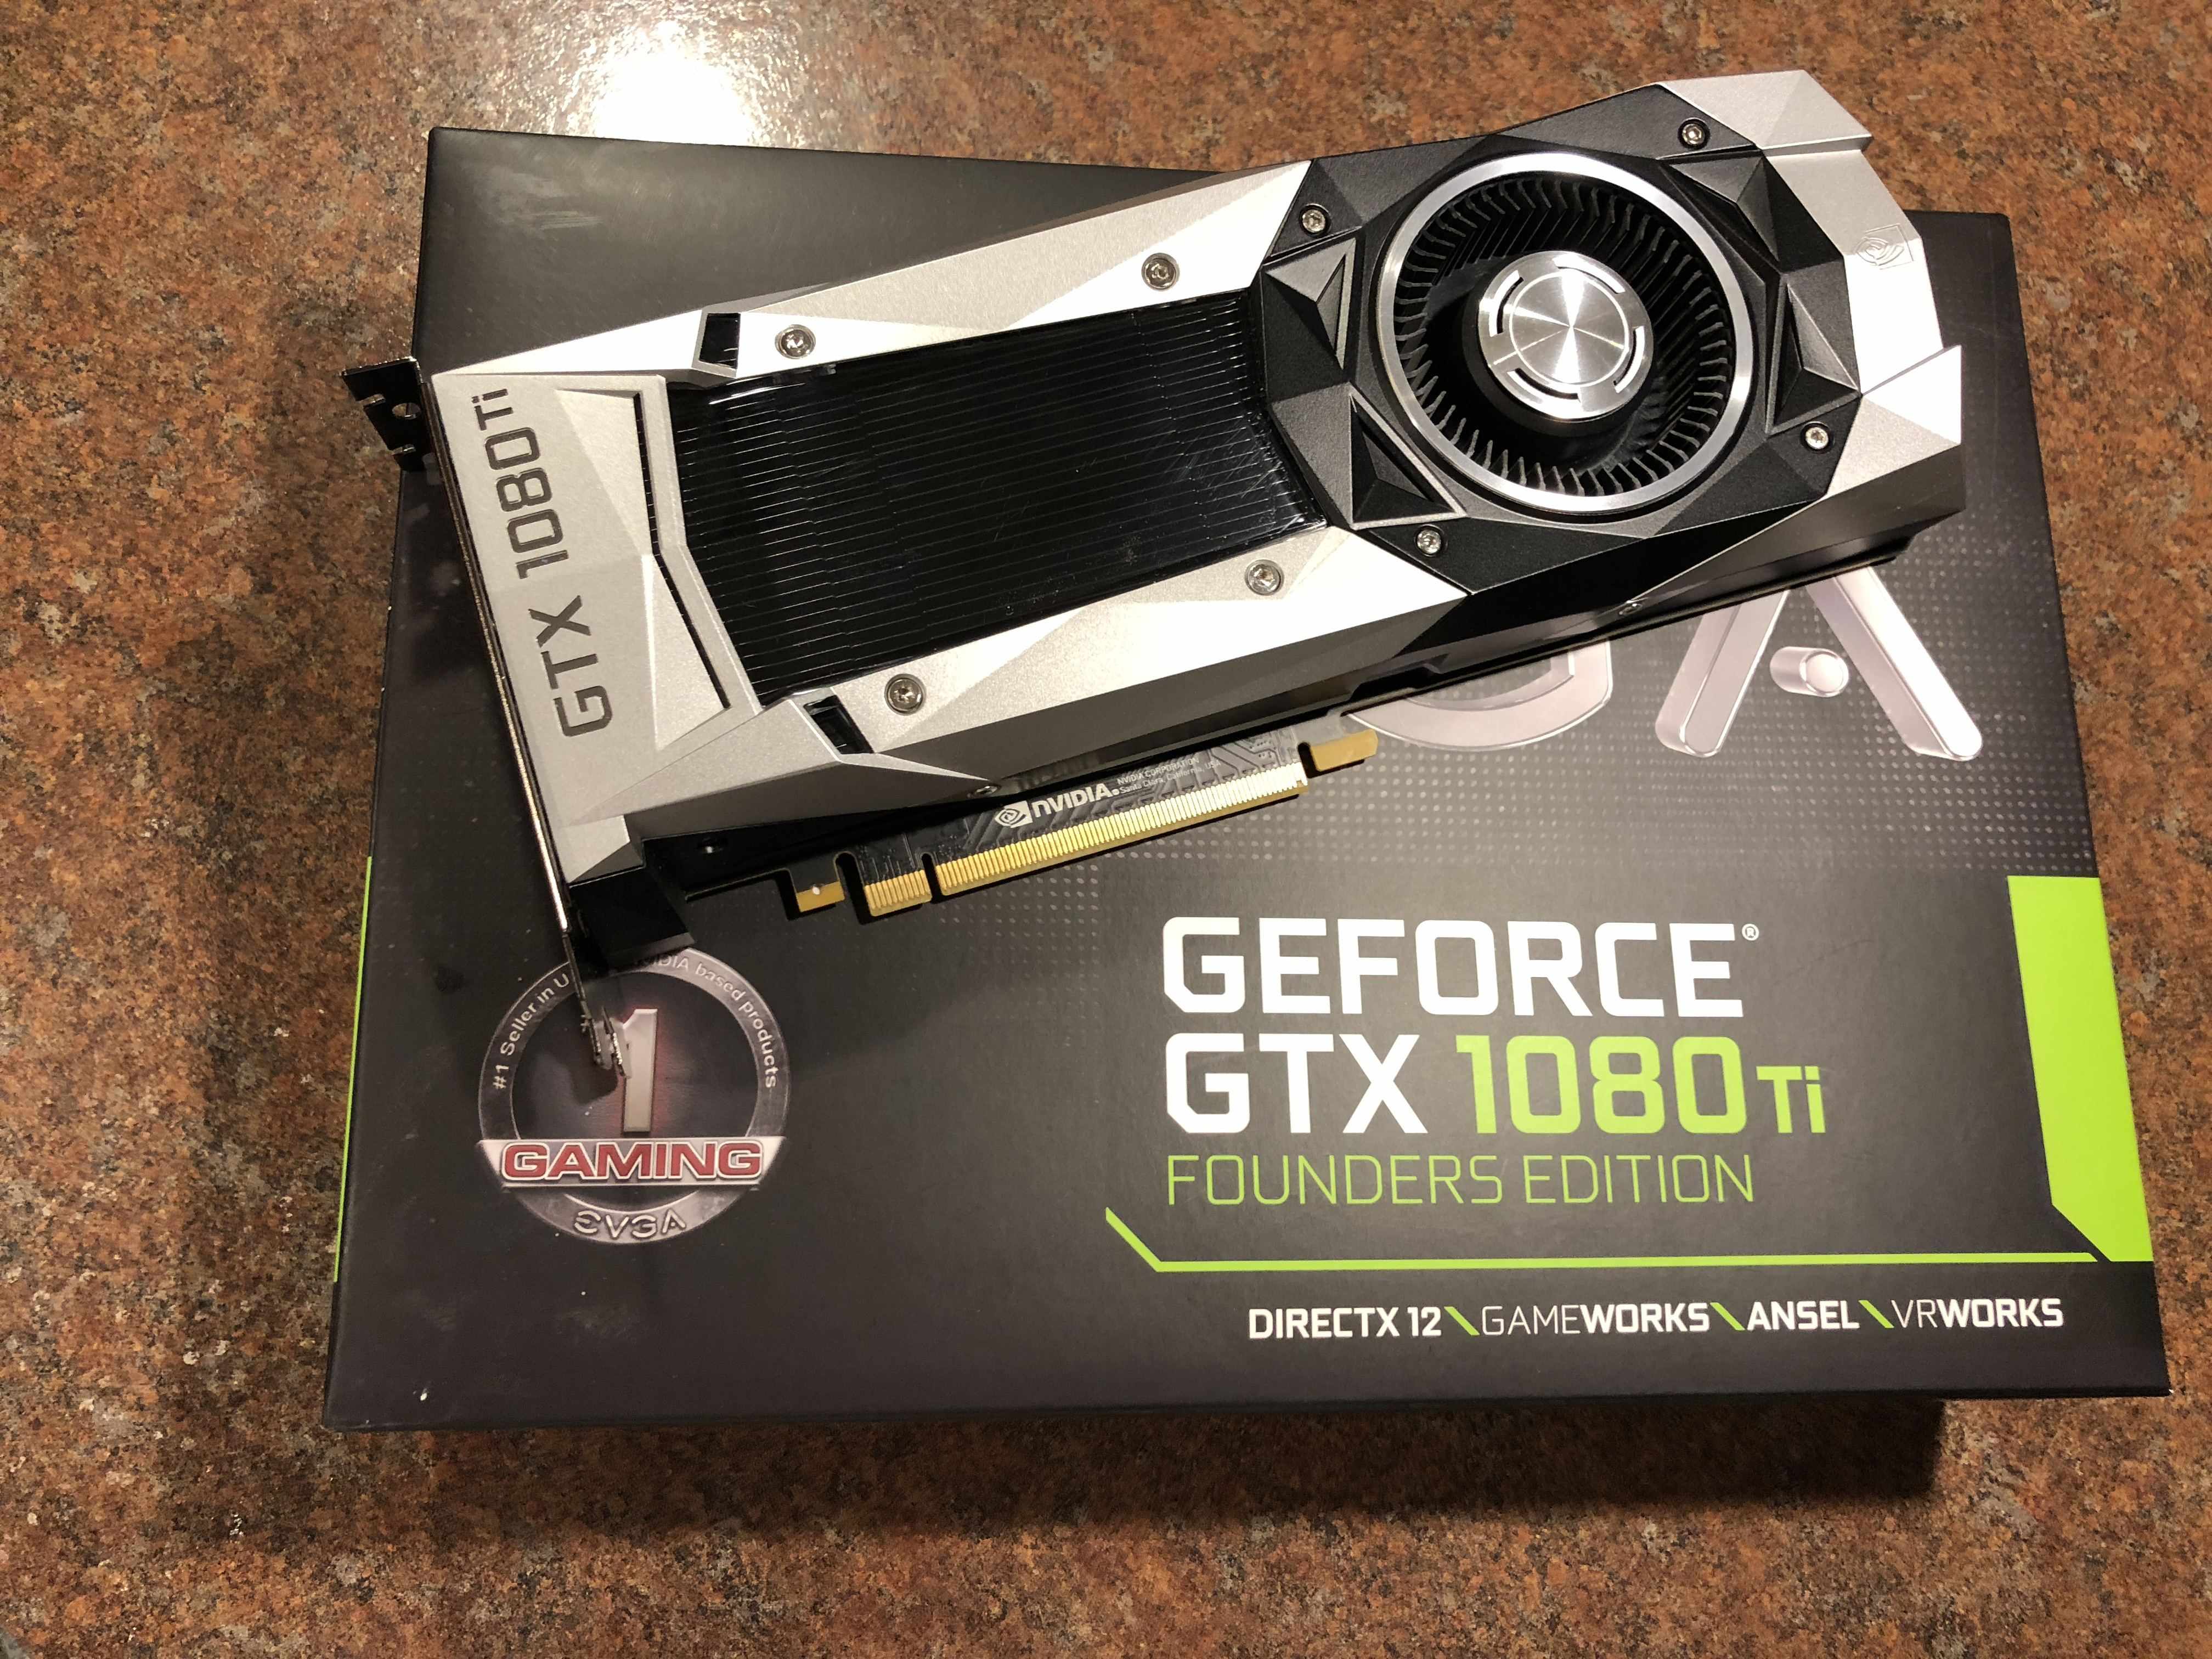 NVIDIA GeForce GTX 1080 Founders Edition Video Card Now 